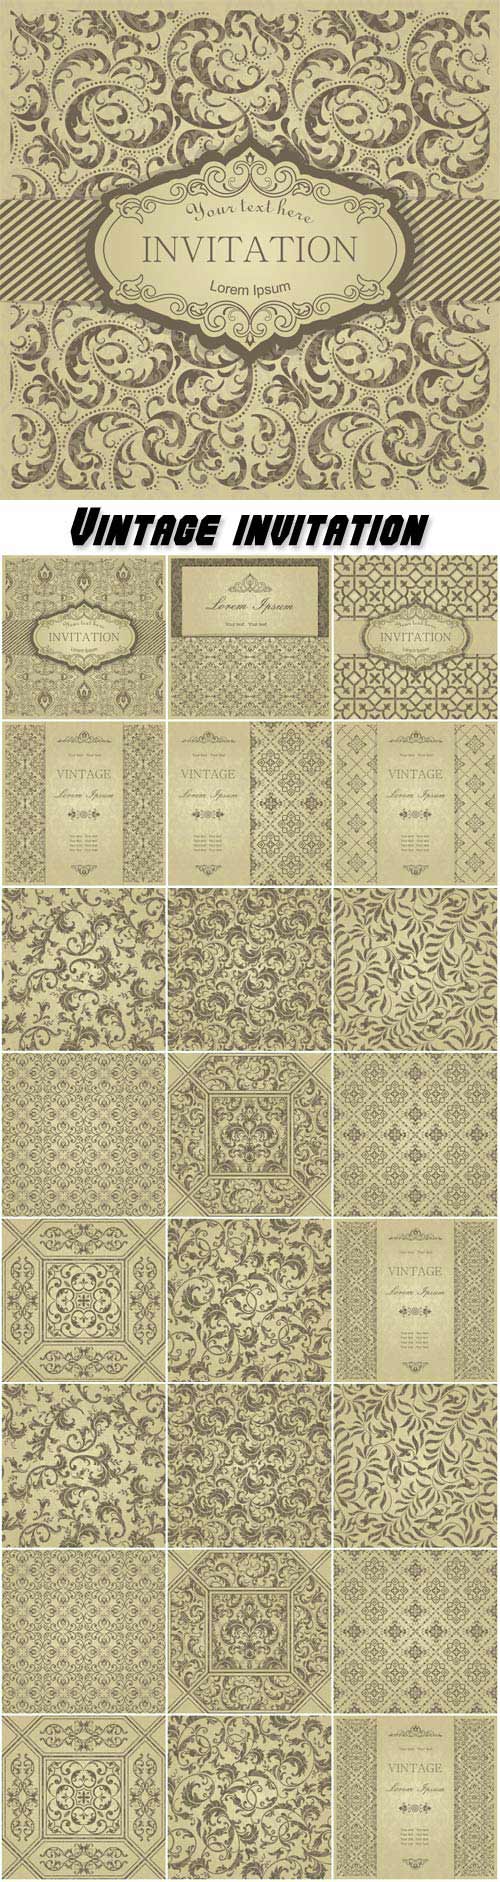 Vintage invitation, vector backgrounds with patterns and ornaments